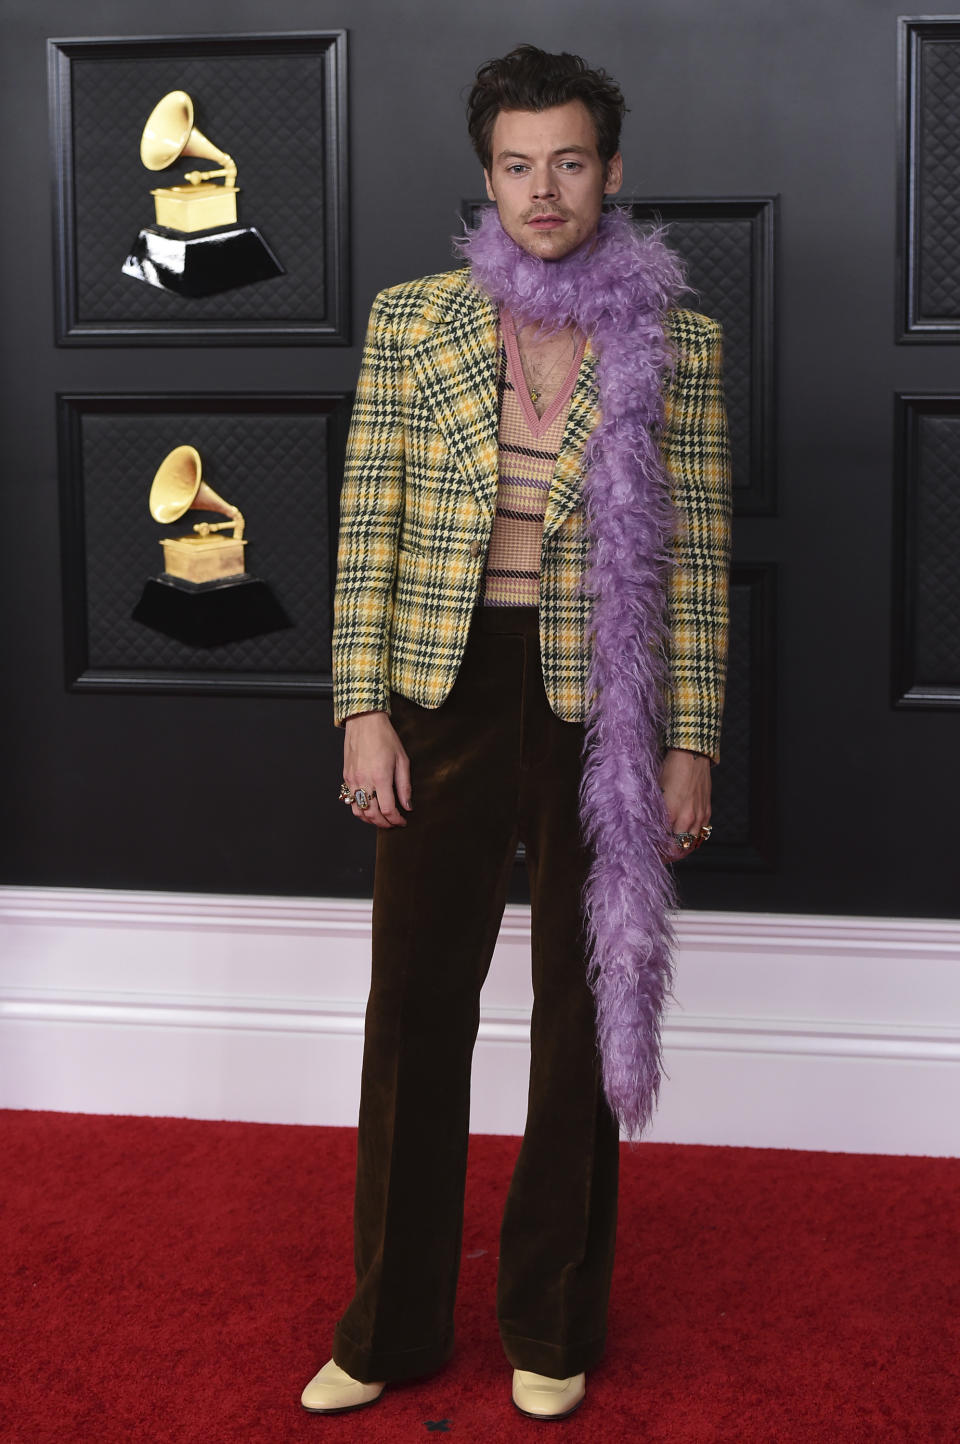 FILE - Harry Styles poses in the press room at the 63rd annual Grammy Awards on March 14, 2021. Styles turns 28 on Feb. 1. (Photo by Jordan Strauss/Invision/AP, File)